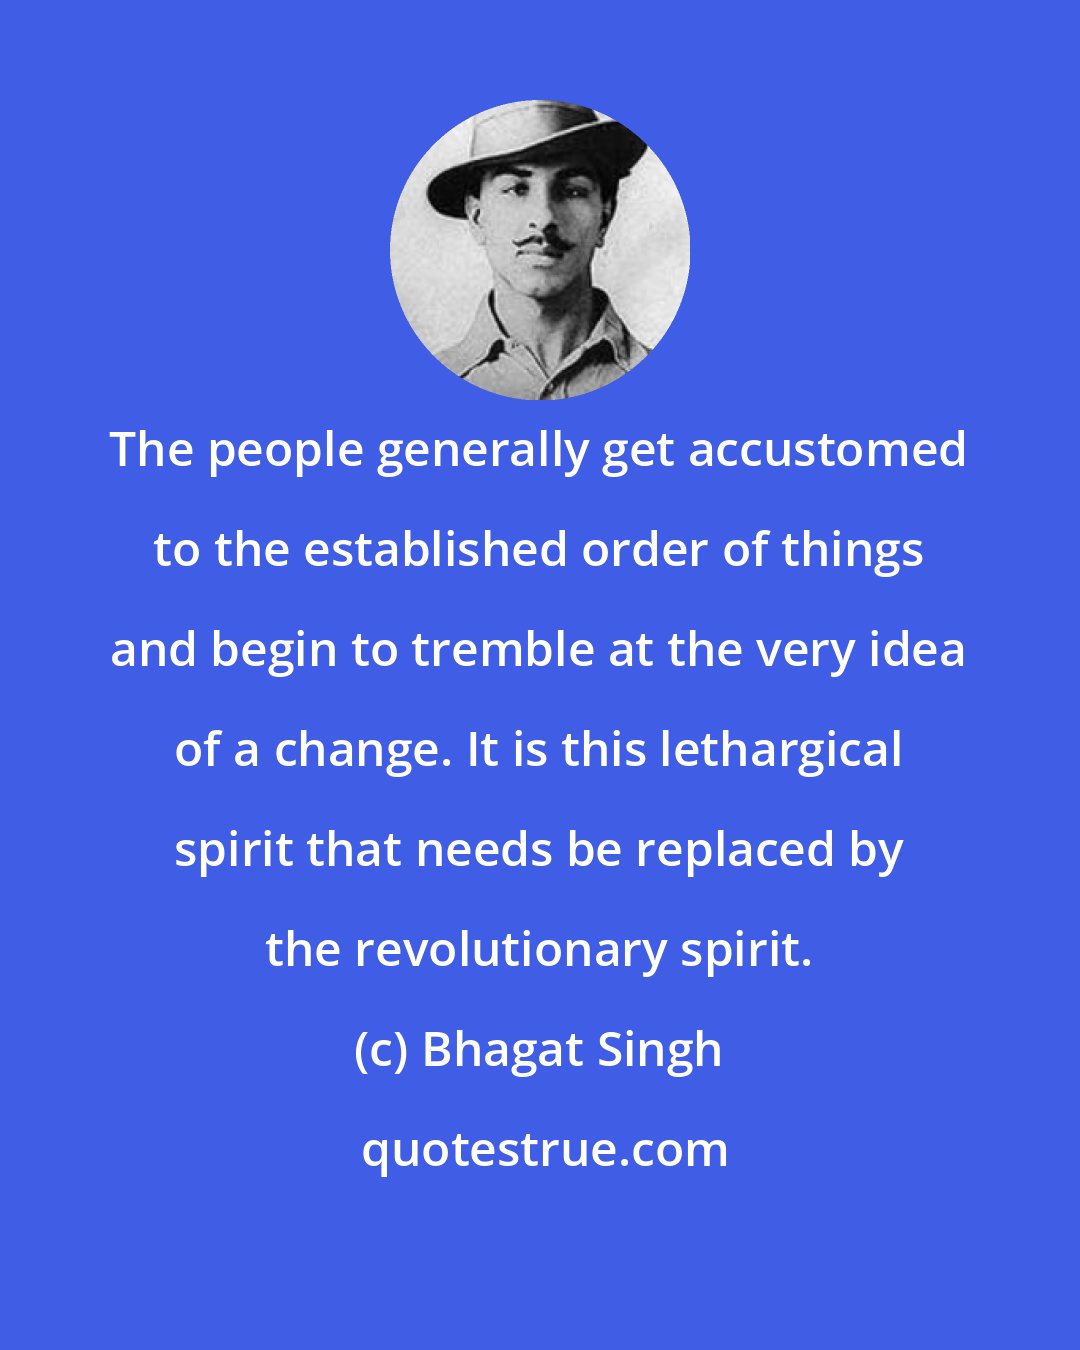 Bhagat Singh: The people generally get accustomed to the established order of things and begin to tremble at the very idea of a change. It is this lethargical spirit that needs be replaced by the revolutionary spirit.